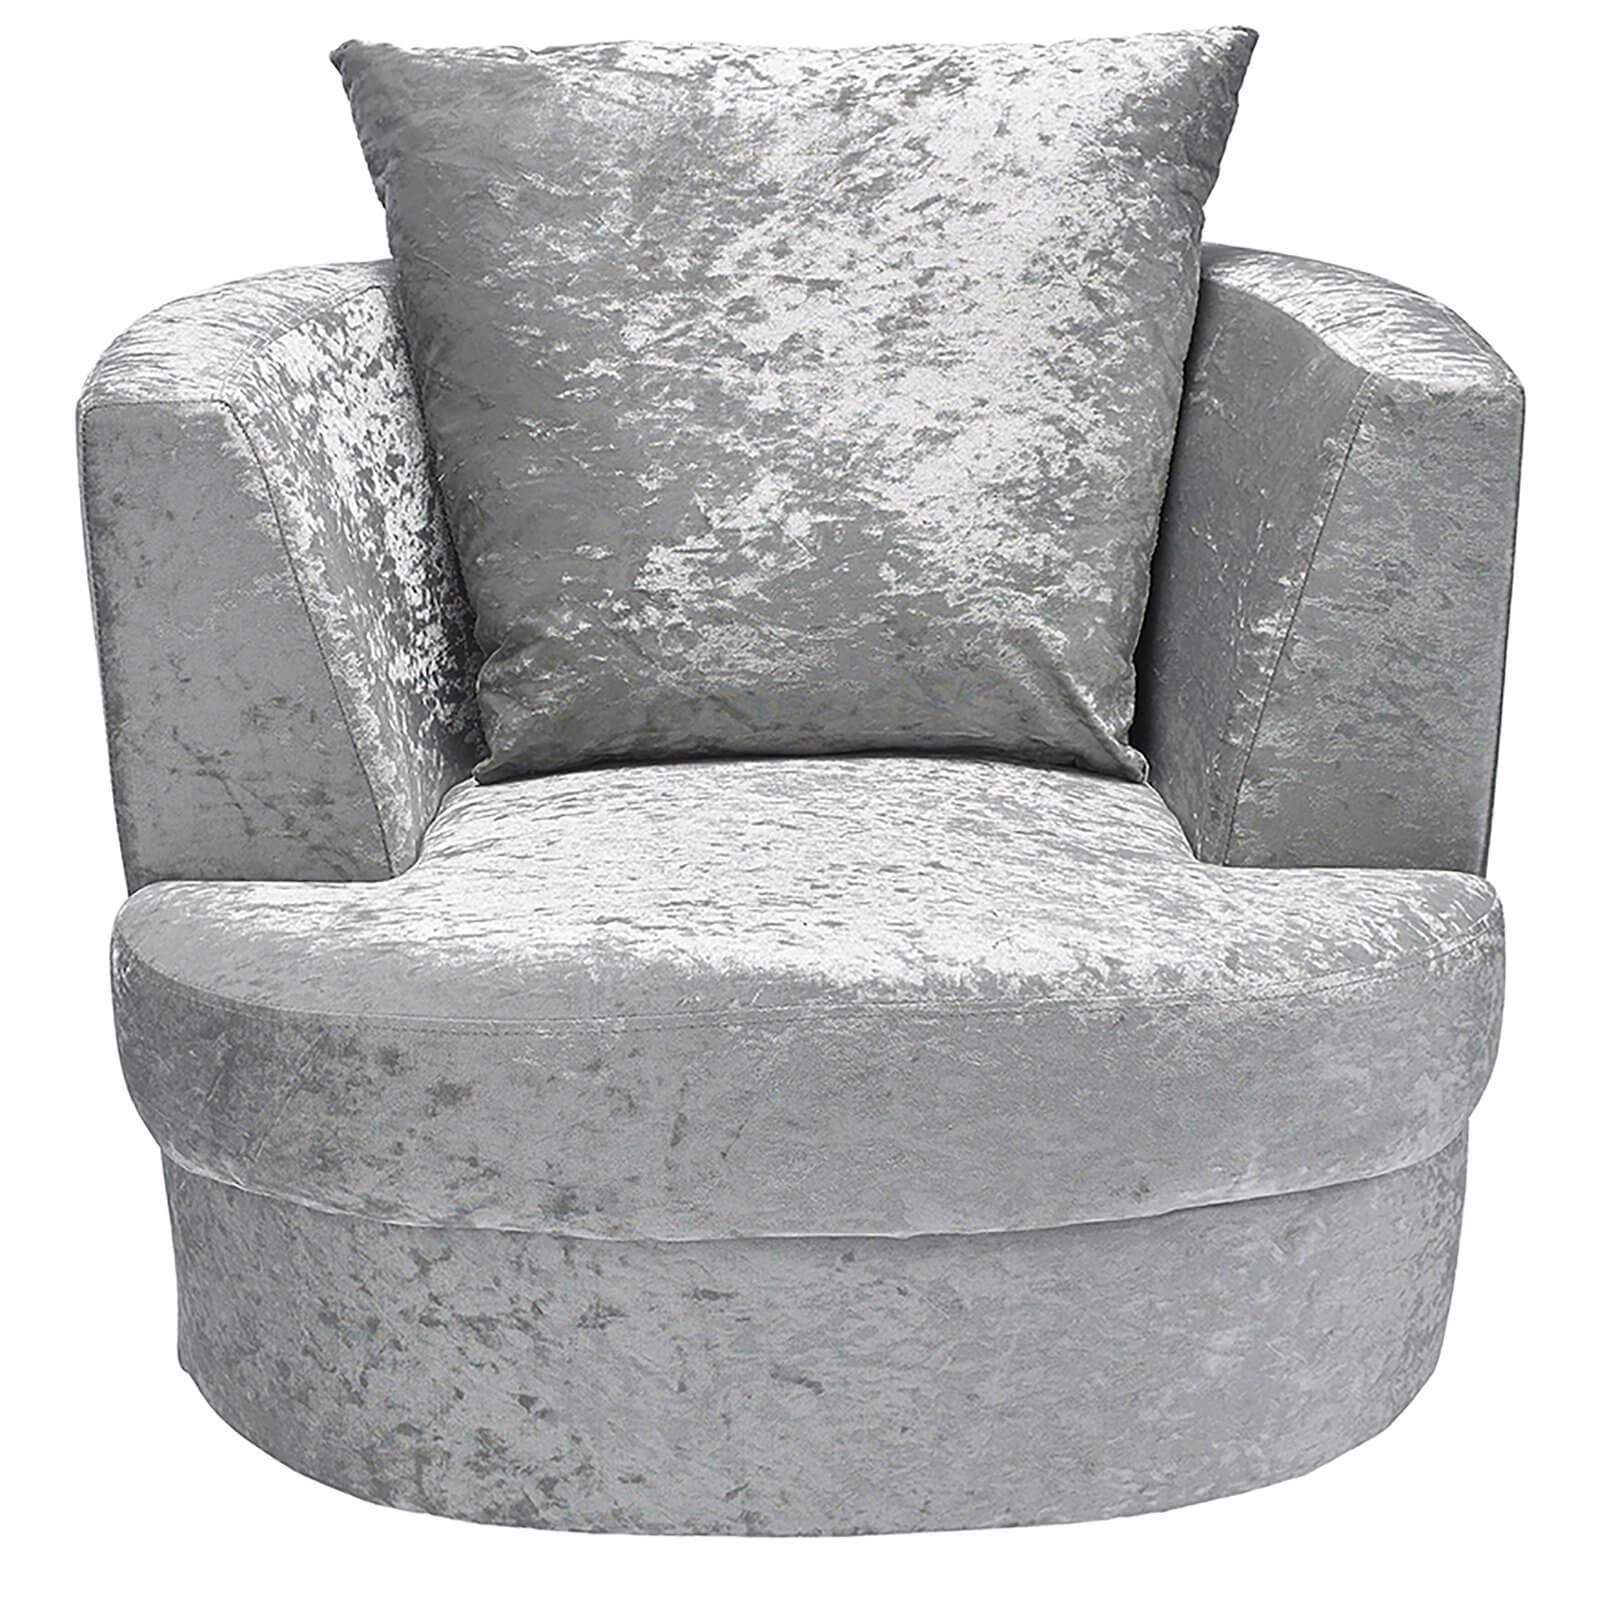 Bliss Small Swivel Chair - Silver